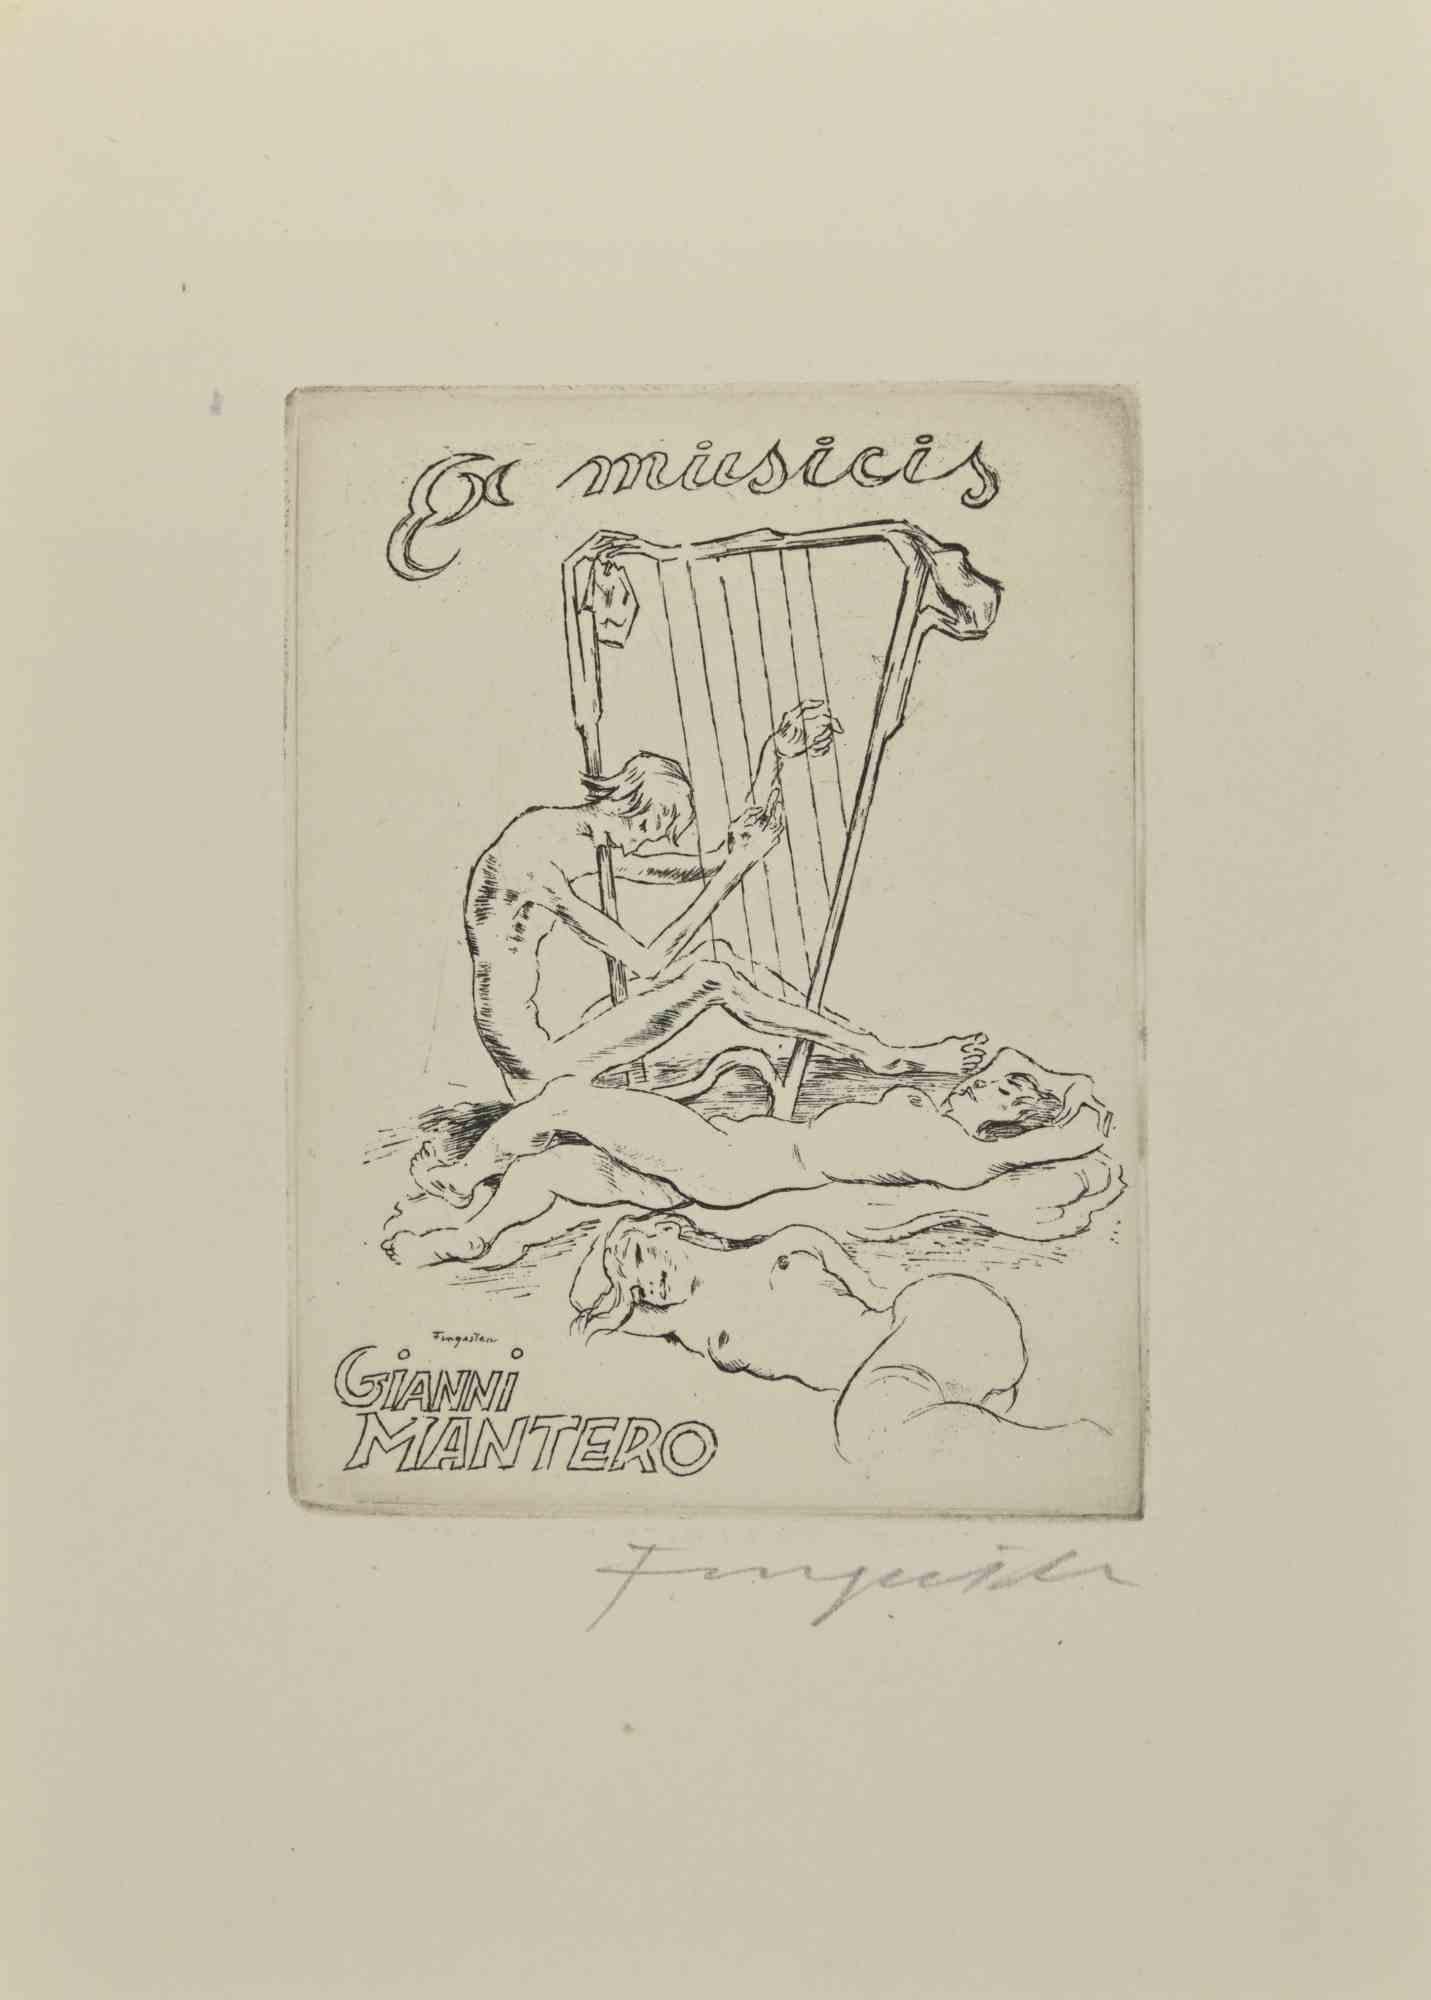 Ex Libris - Gianni Mantero -Ex Musicis is an Etching print created by Michel Fingesten.

Hand Signed on  the lower margin.

Good conditions.

Michel Fingesten (1884 - 1943) was a Czech painter and engraver of Jewish origin. He is considered one of